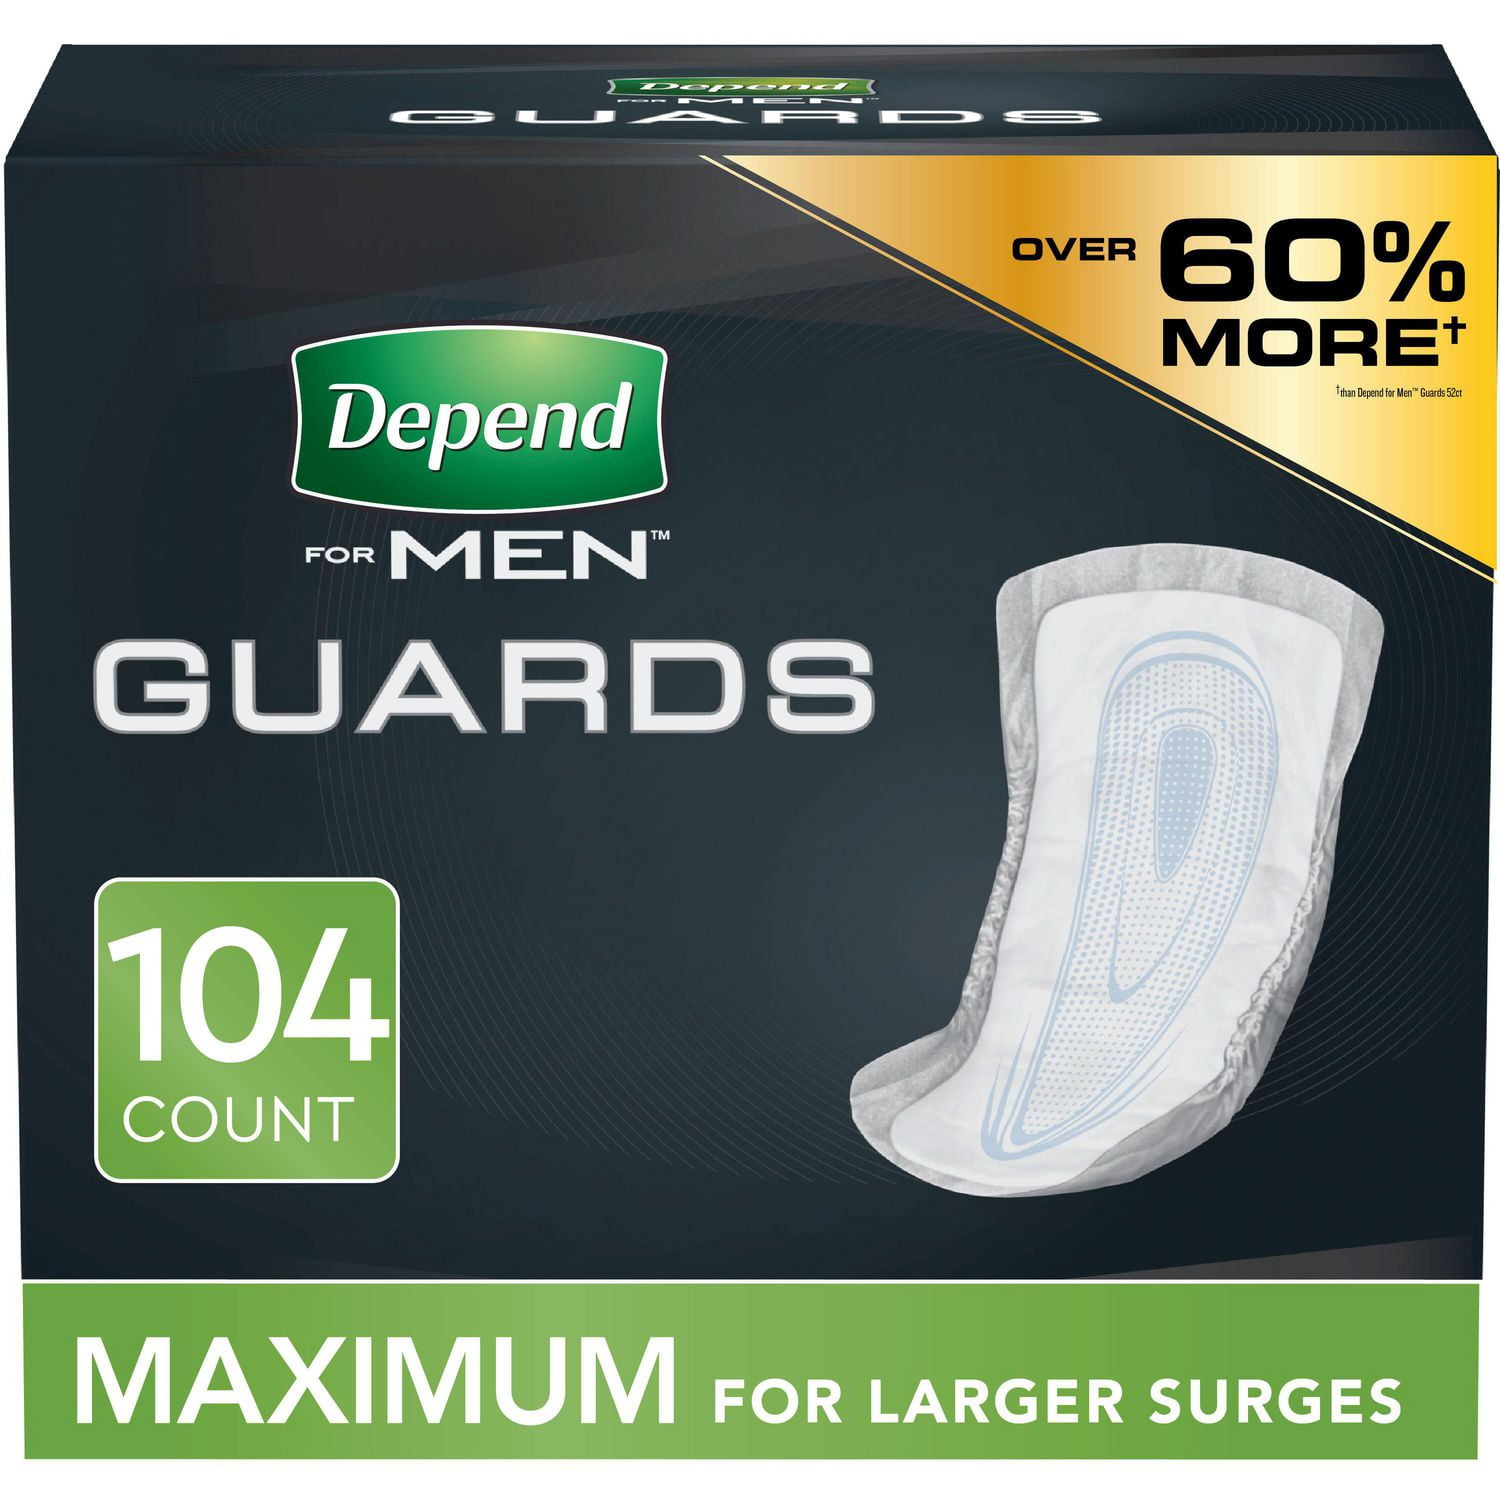 Depend Incontinence Guards for Men, Maximum Absorbency, 104 Count (2 Packs  of 52) 